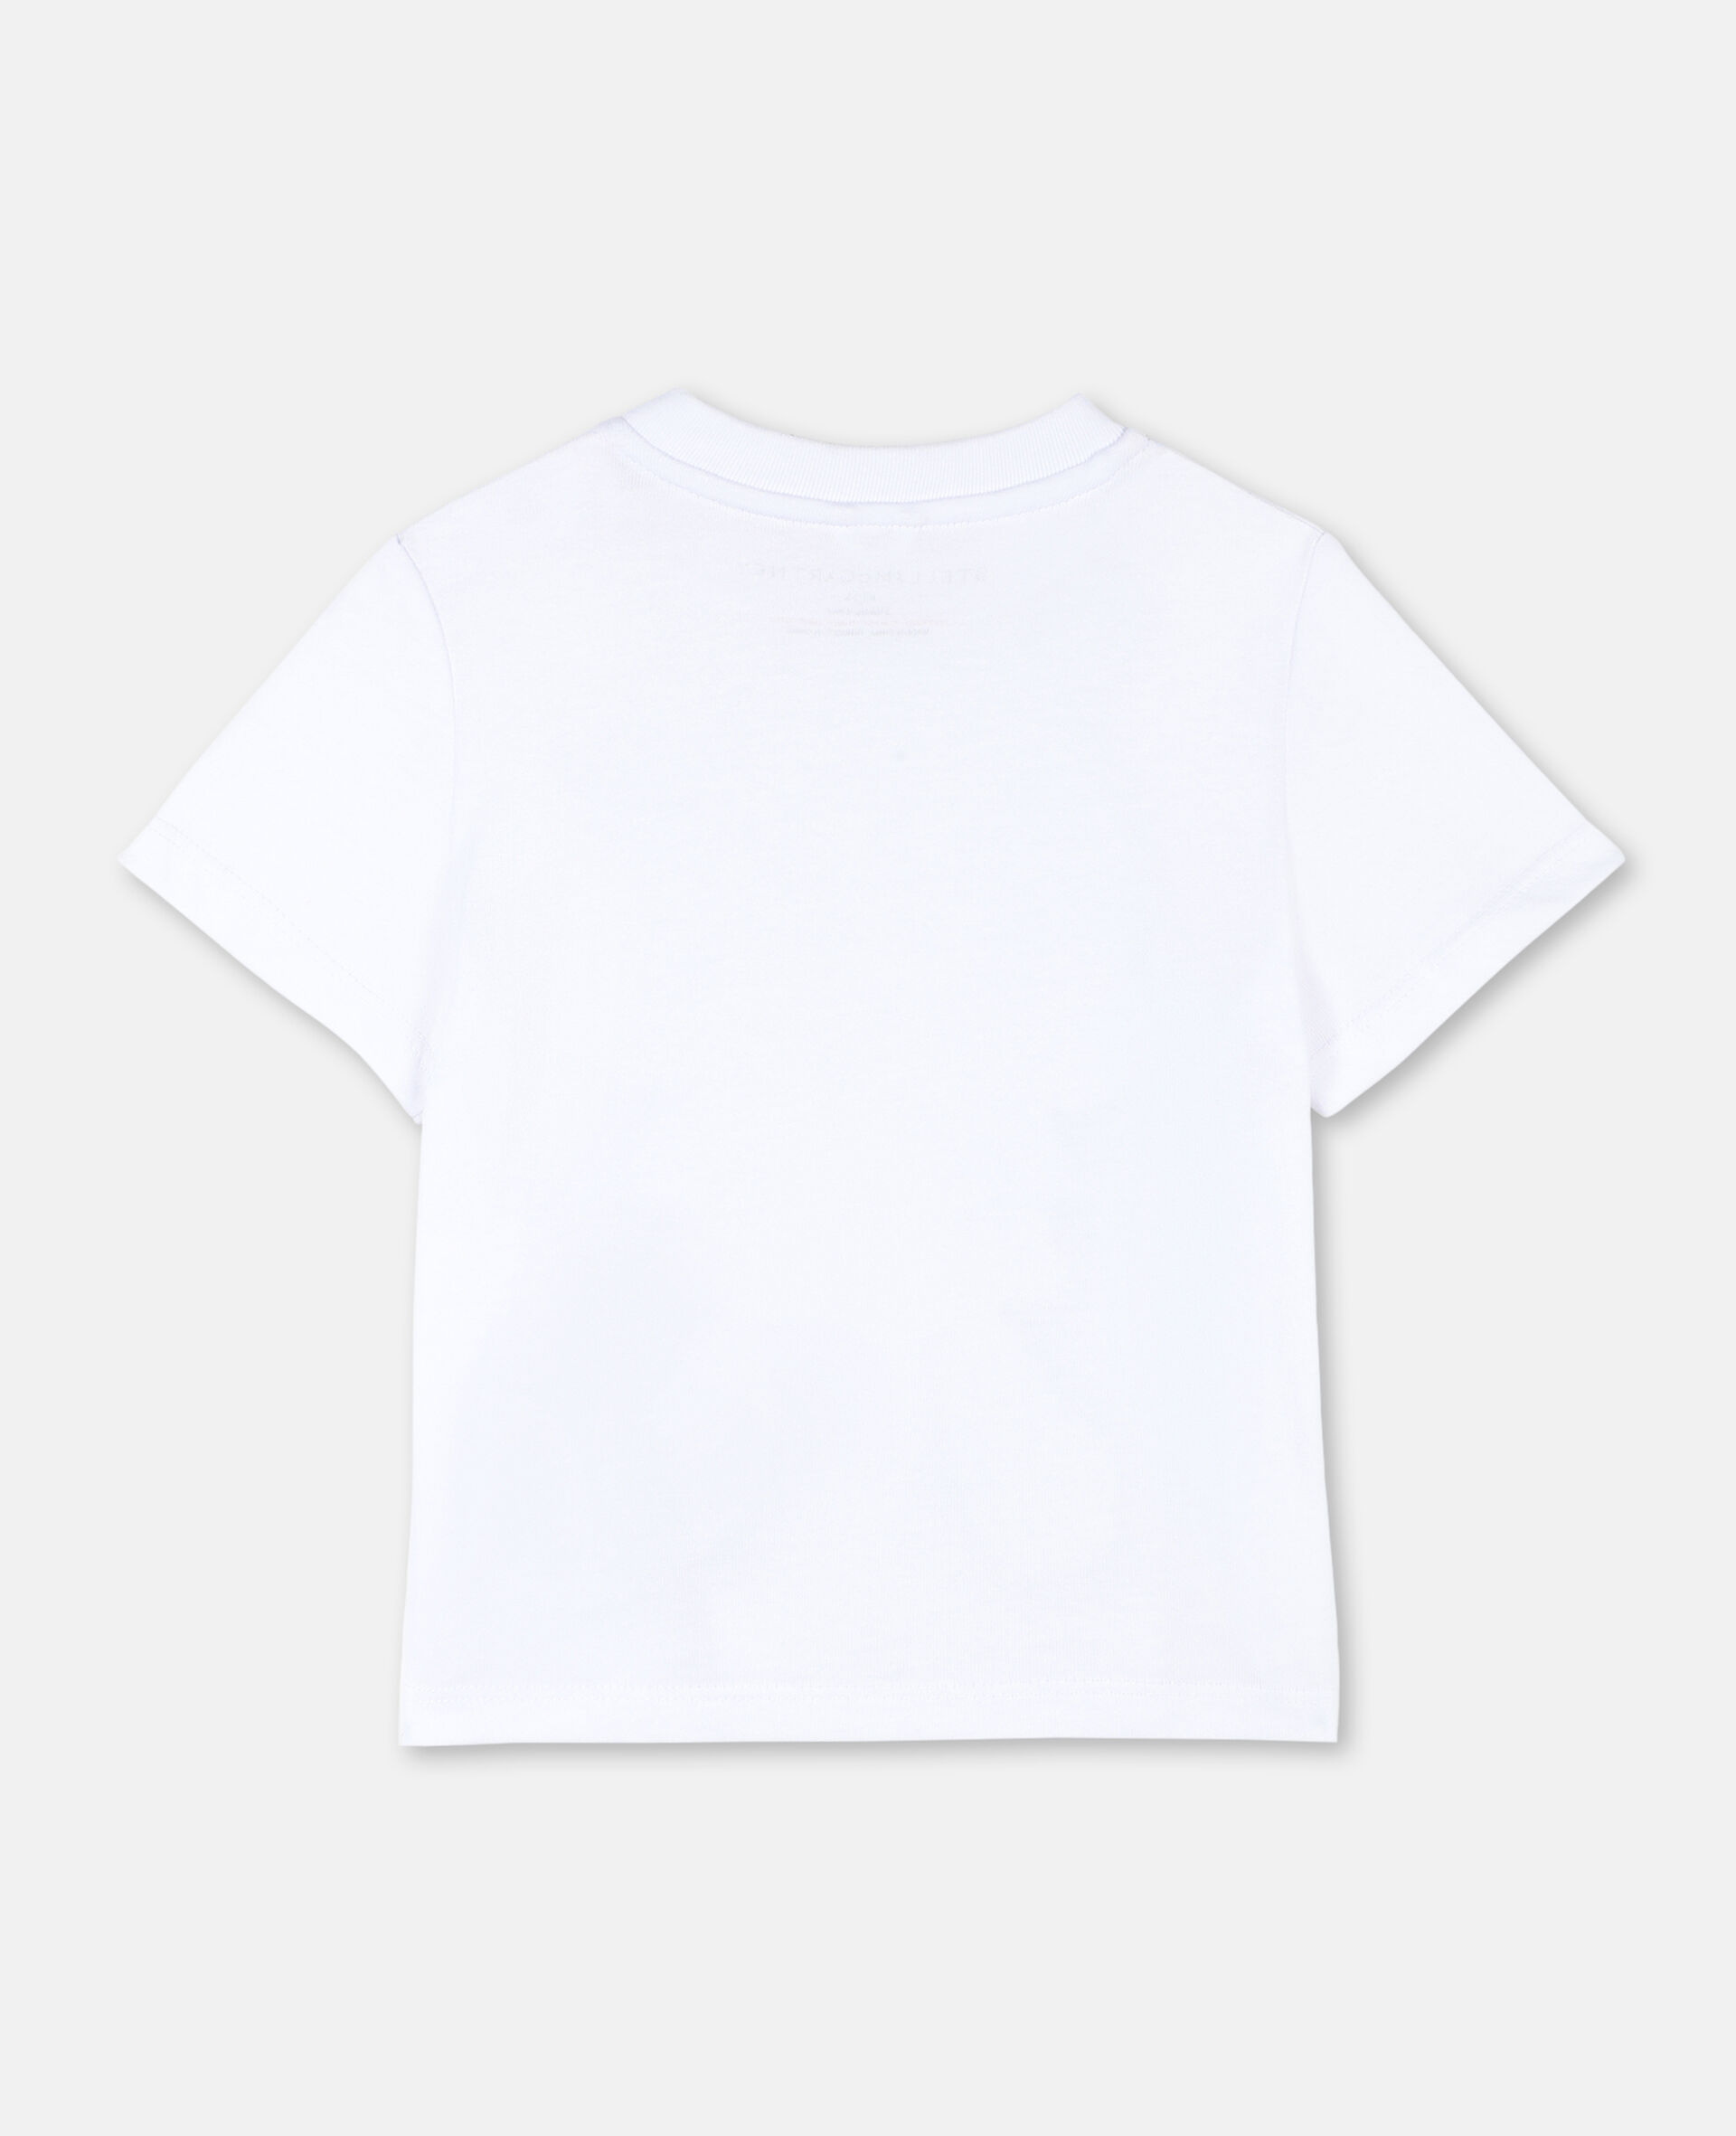 Trompe-L'Oeil Pirate Cotton T-shirt -White-large image number 3